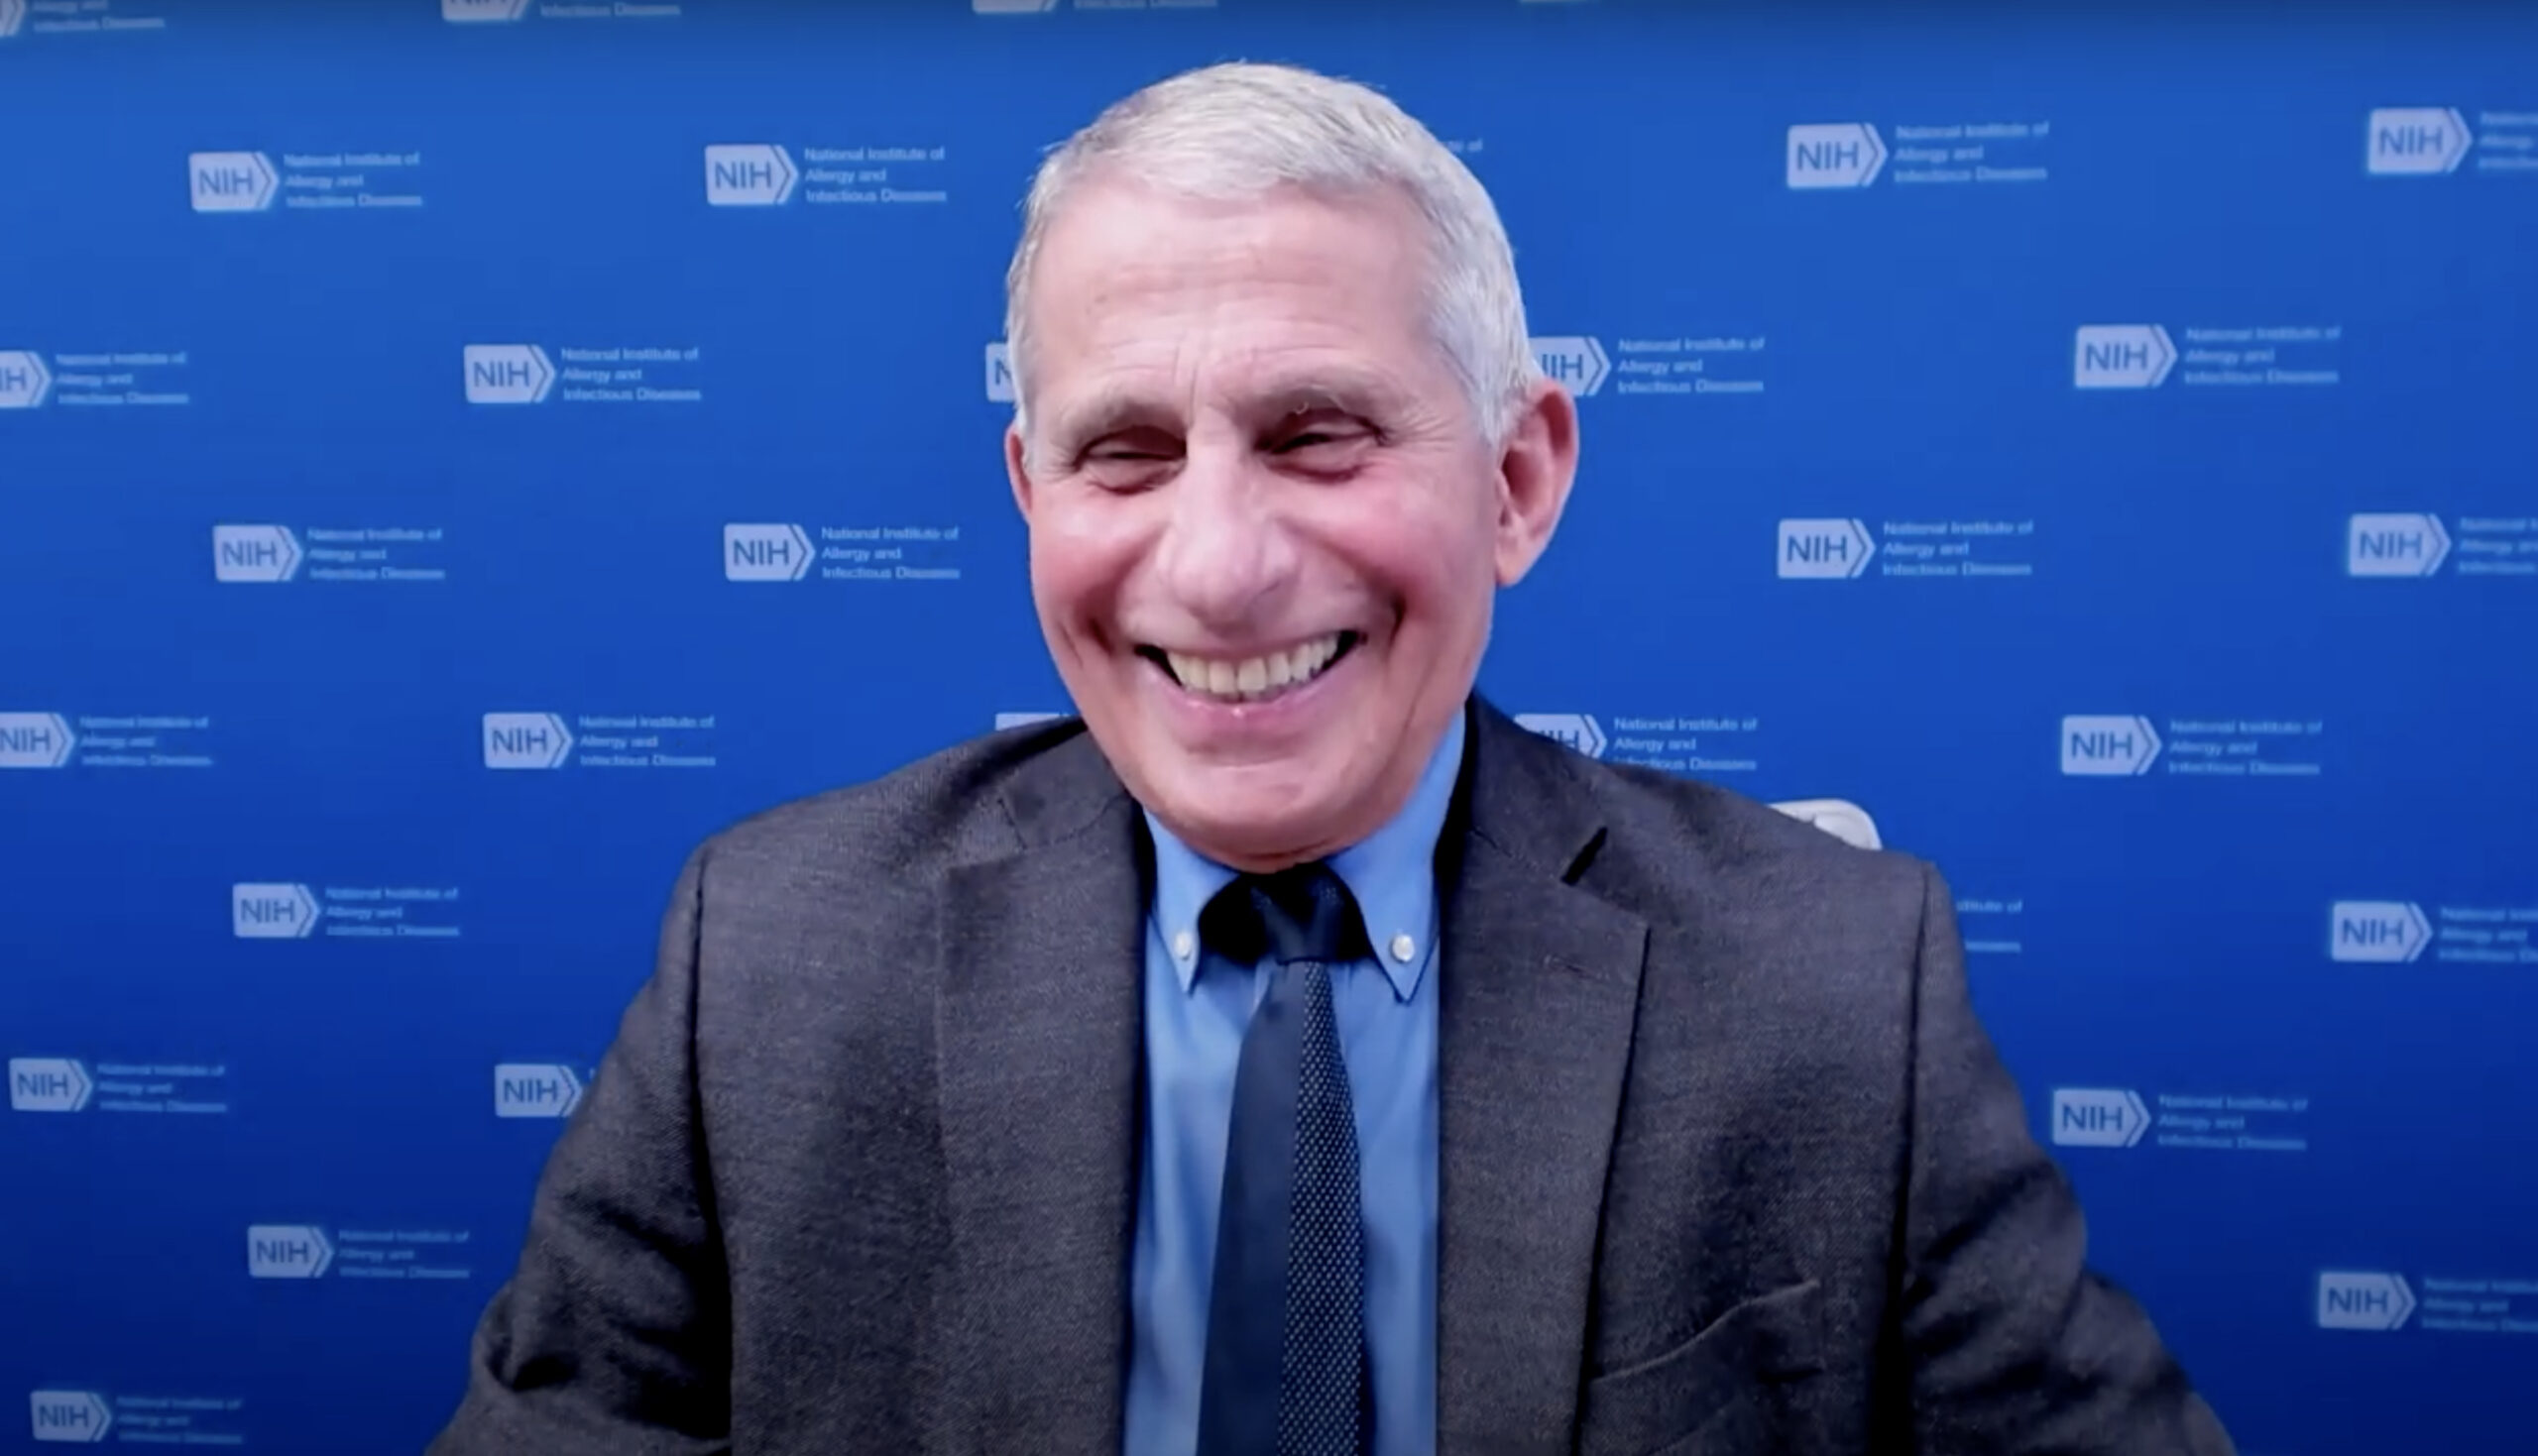 Pandemic Schooling With Dr. Fauci